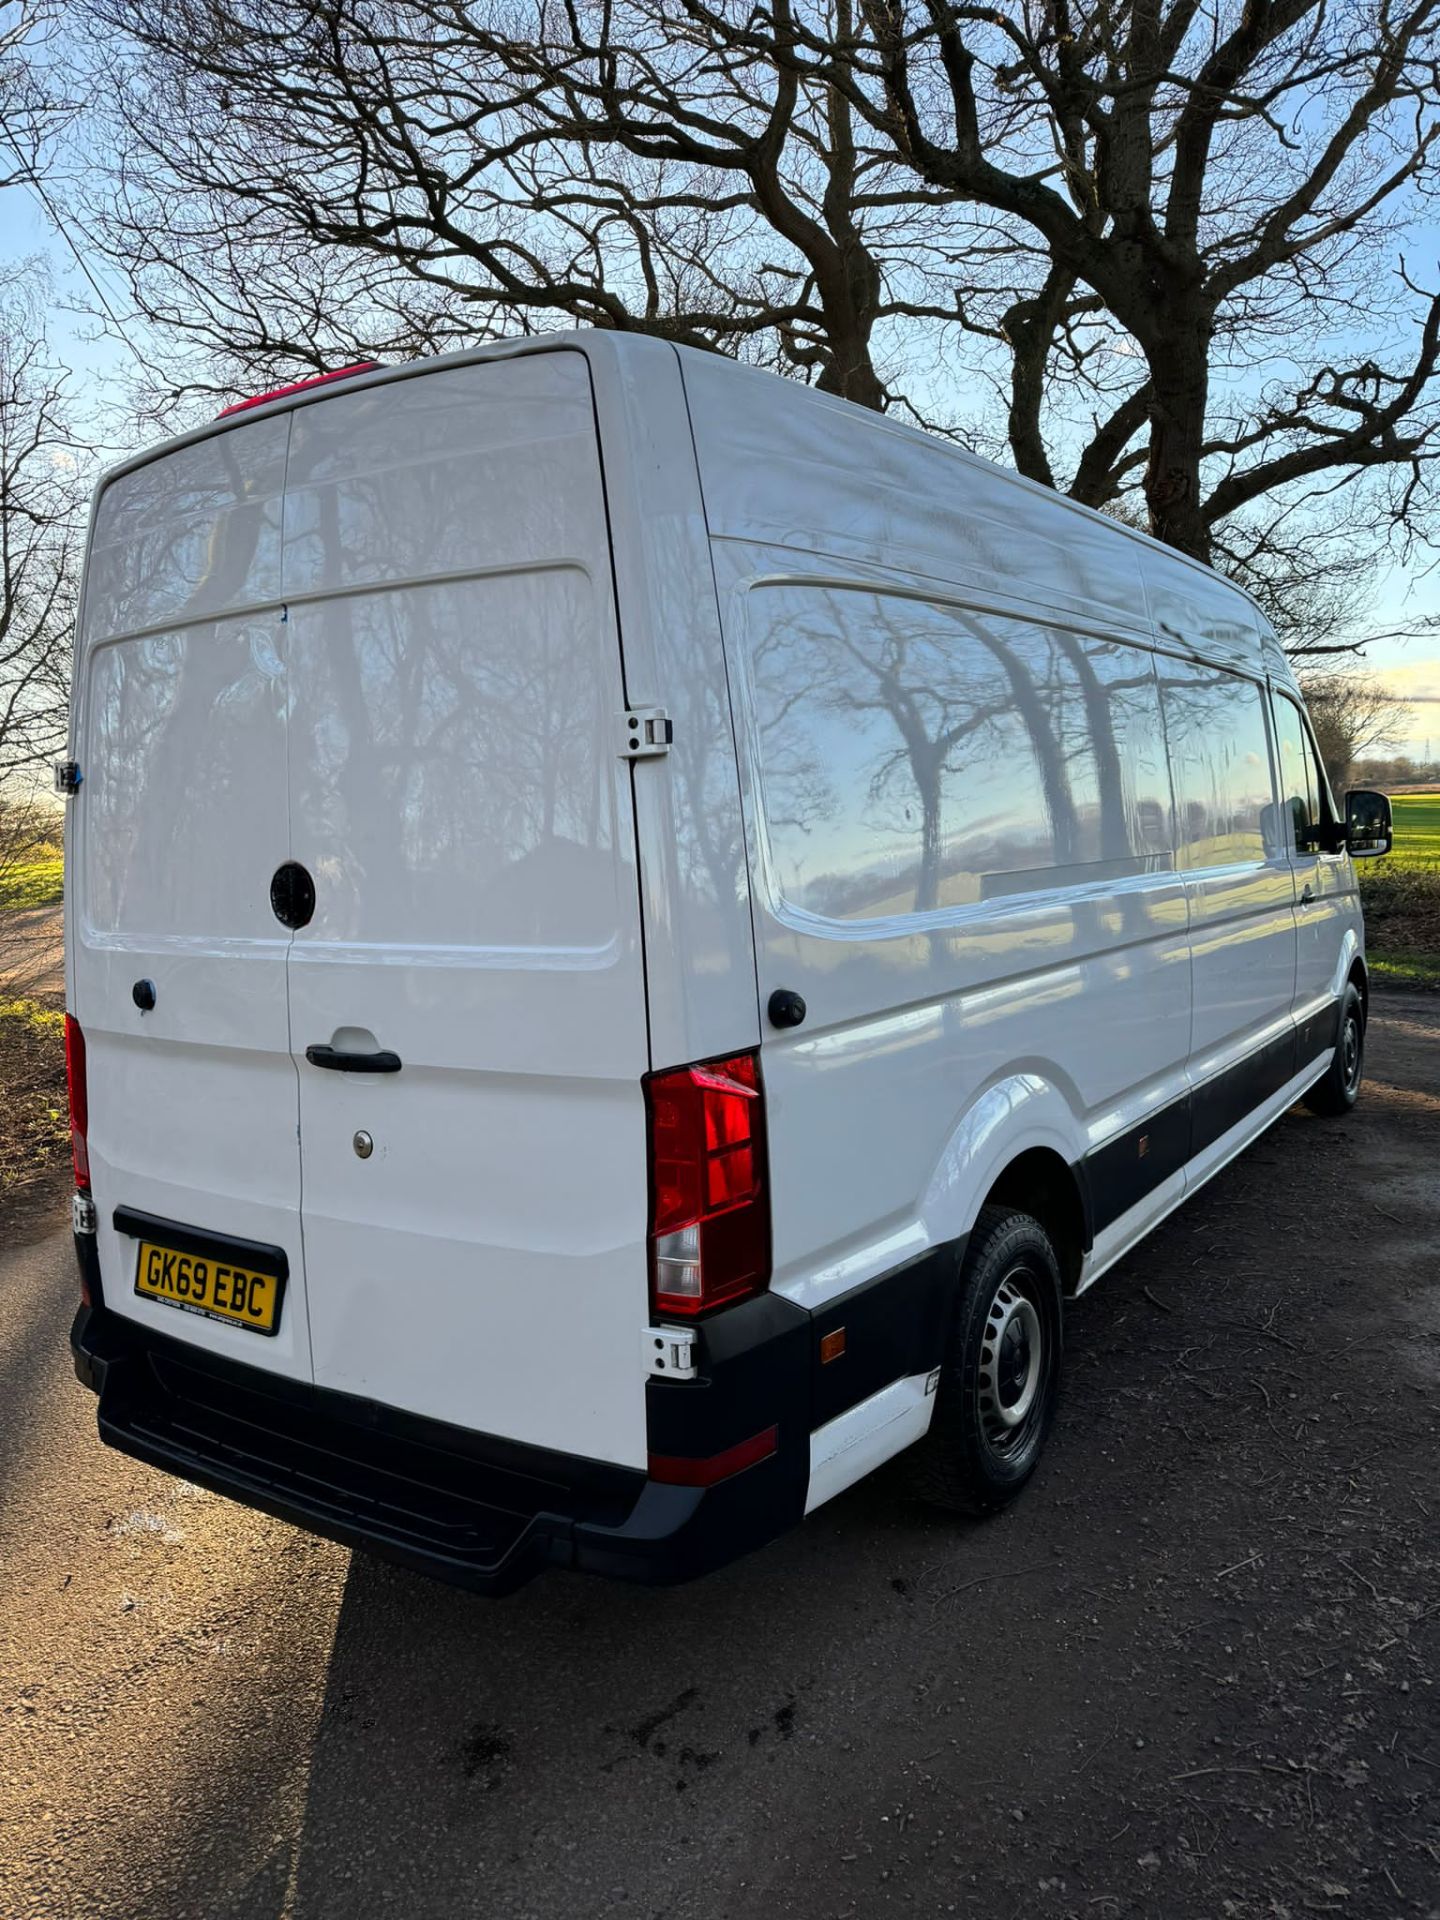 2019 69 VOLKSWAGEN CRAFTER LWB HIGH ROOF PANEL VAN - 87K MILES - PLY LINED. - Image 7 of 11